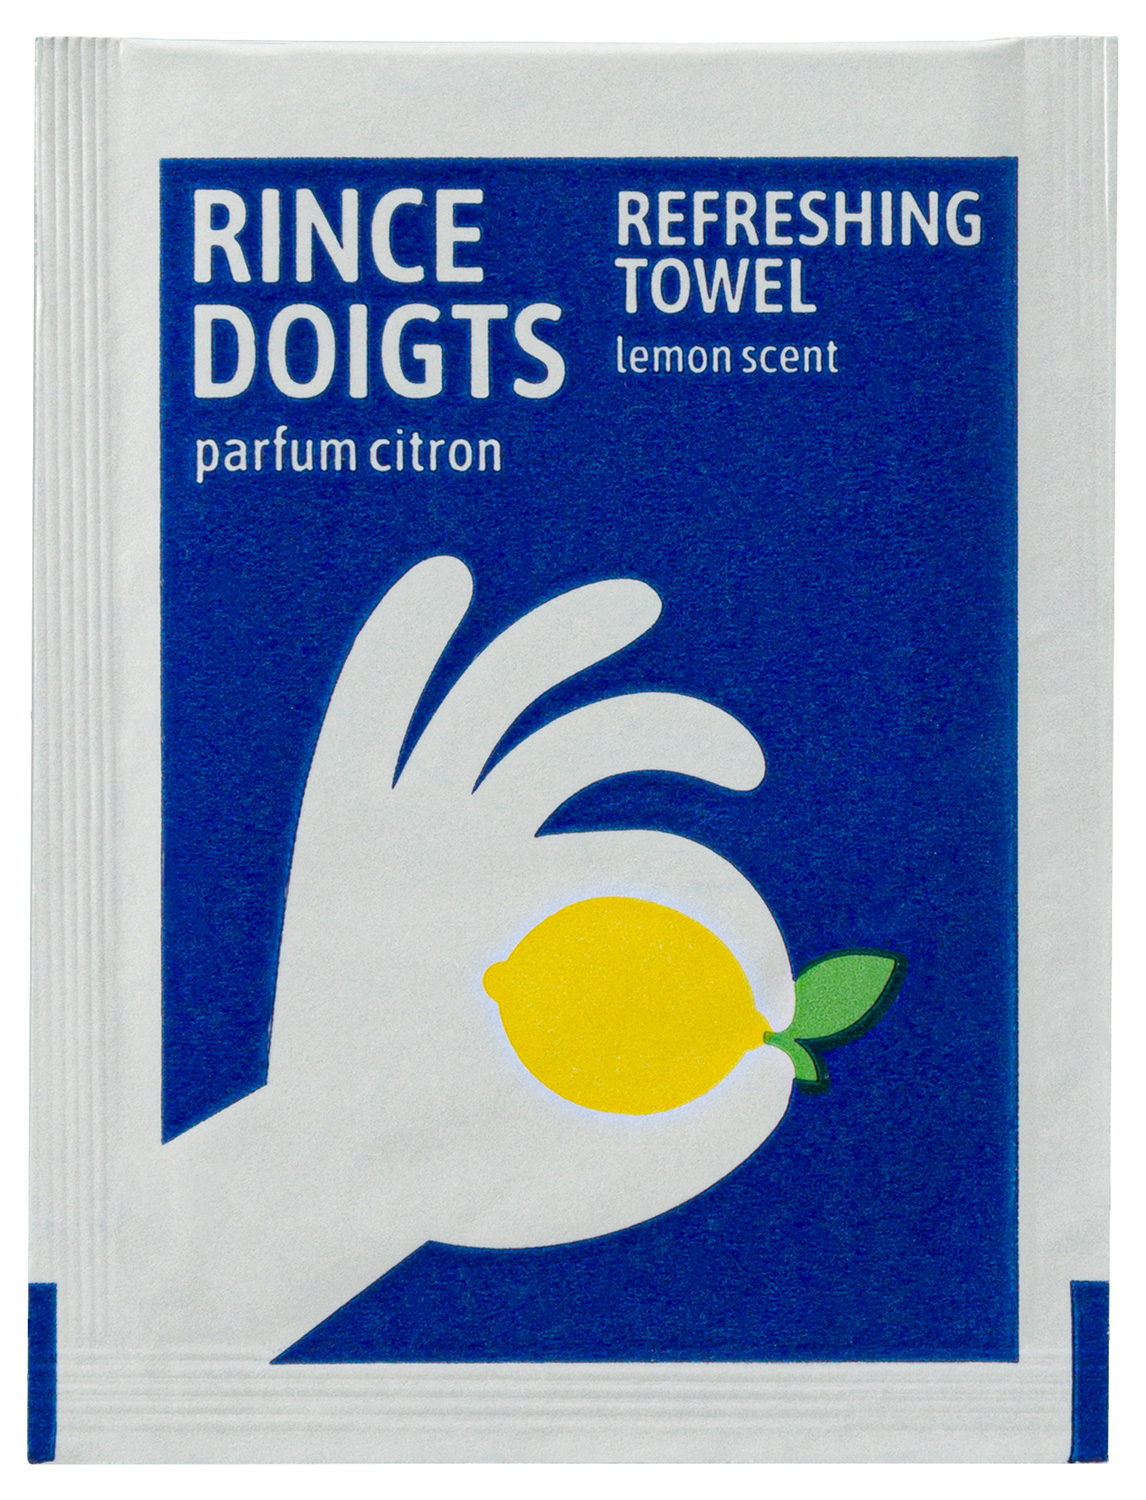 Rince doigts